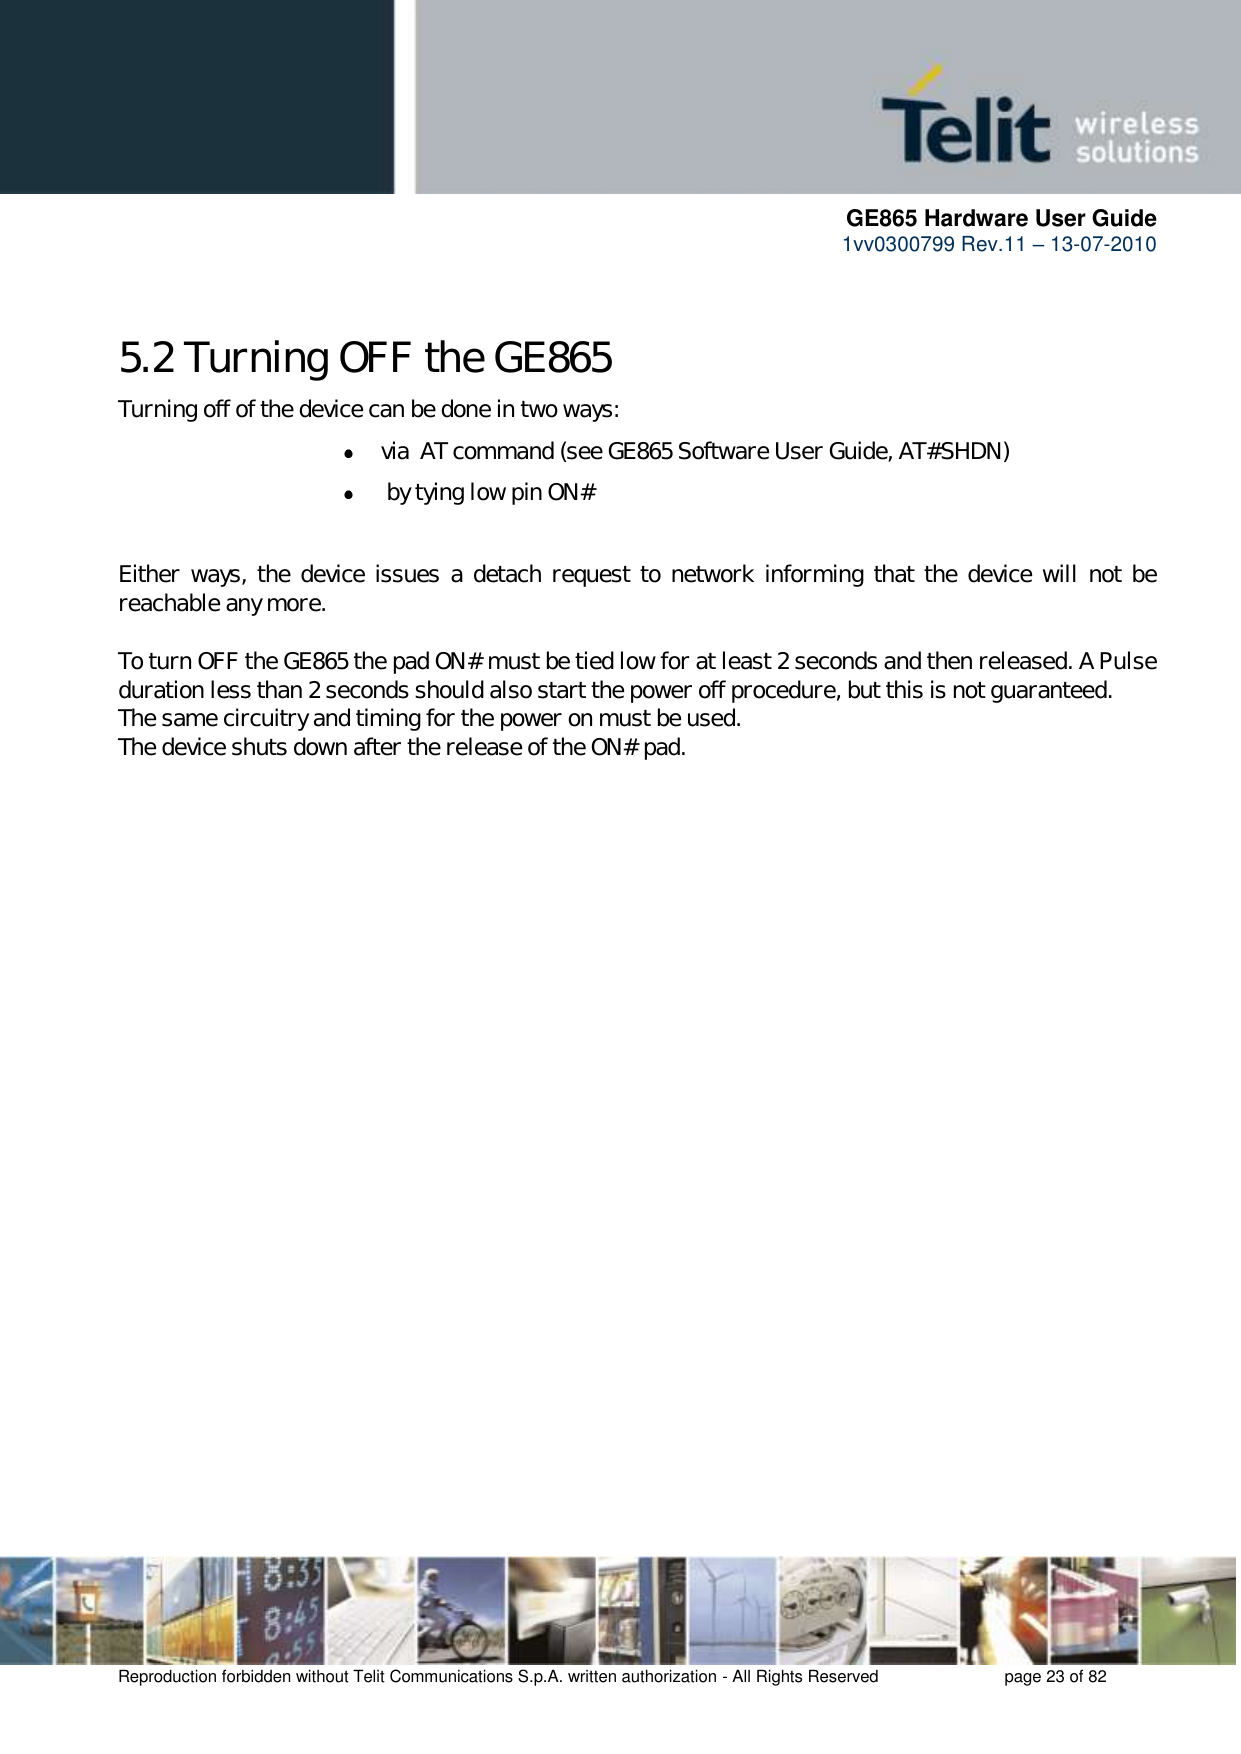      GE865 Hardware User Guide 1vv0300799 Rev.11 – 13-07-2010       Reproduction forbidden without Telit Communications S.p.A. written authorization - All Rights Reserved    page 23 of 82  5.2 Turning OFF the GE865 Turning off of the device can be done in two ways:  via  AT command (see GE865 Software User Guide, AT#SHDN)   by tying low pin ON#  Either ways, the  device issues a detach request to  network informing that the  device will not  be reachable any more.   To turn OFF the GE865 the pad ON# must be tied low for at least 2 seconds and then released. A Pulse duration less than 2 seconds should also start the power off procedure, but this is not guaranteed. The same circuitry and timing for the power on must be used.  The device shuts down after the release of the ON# pad.  